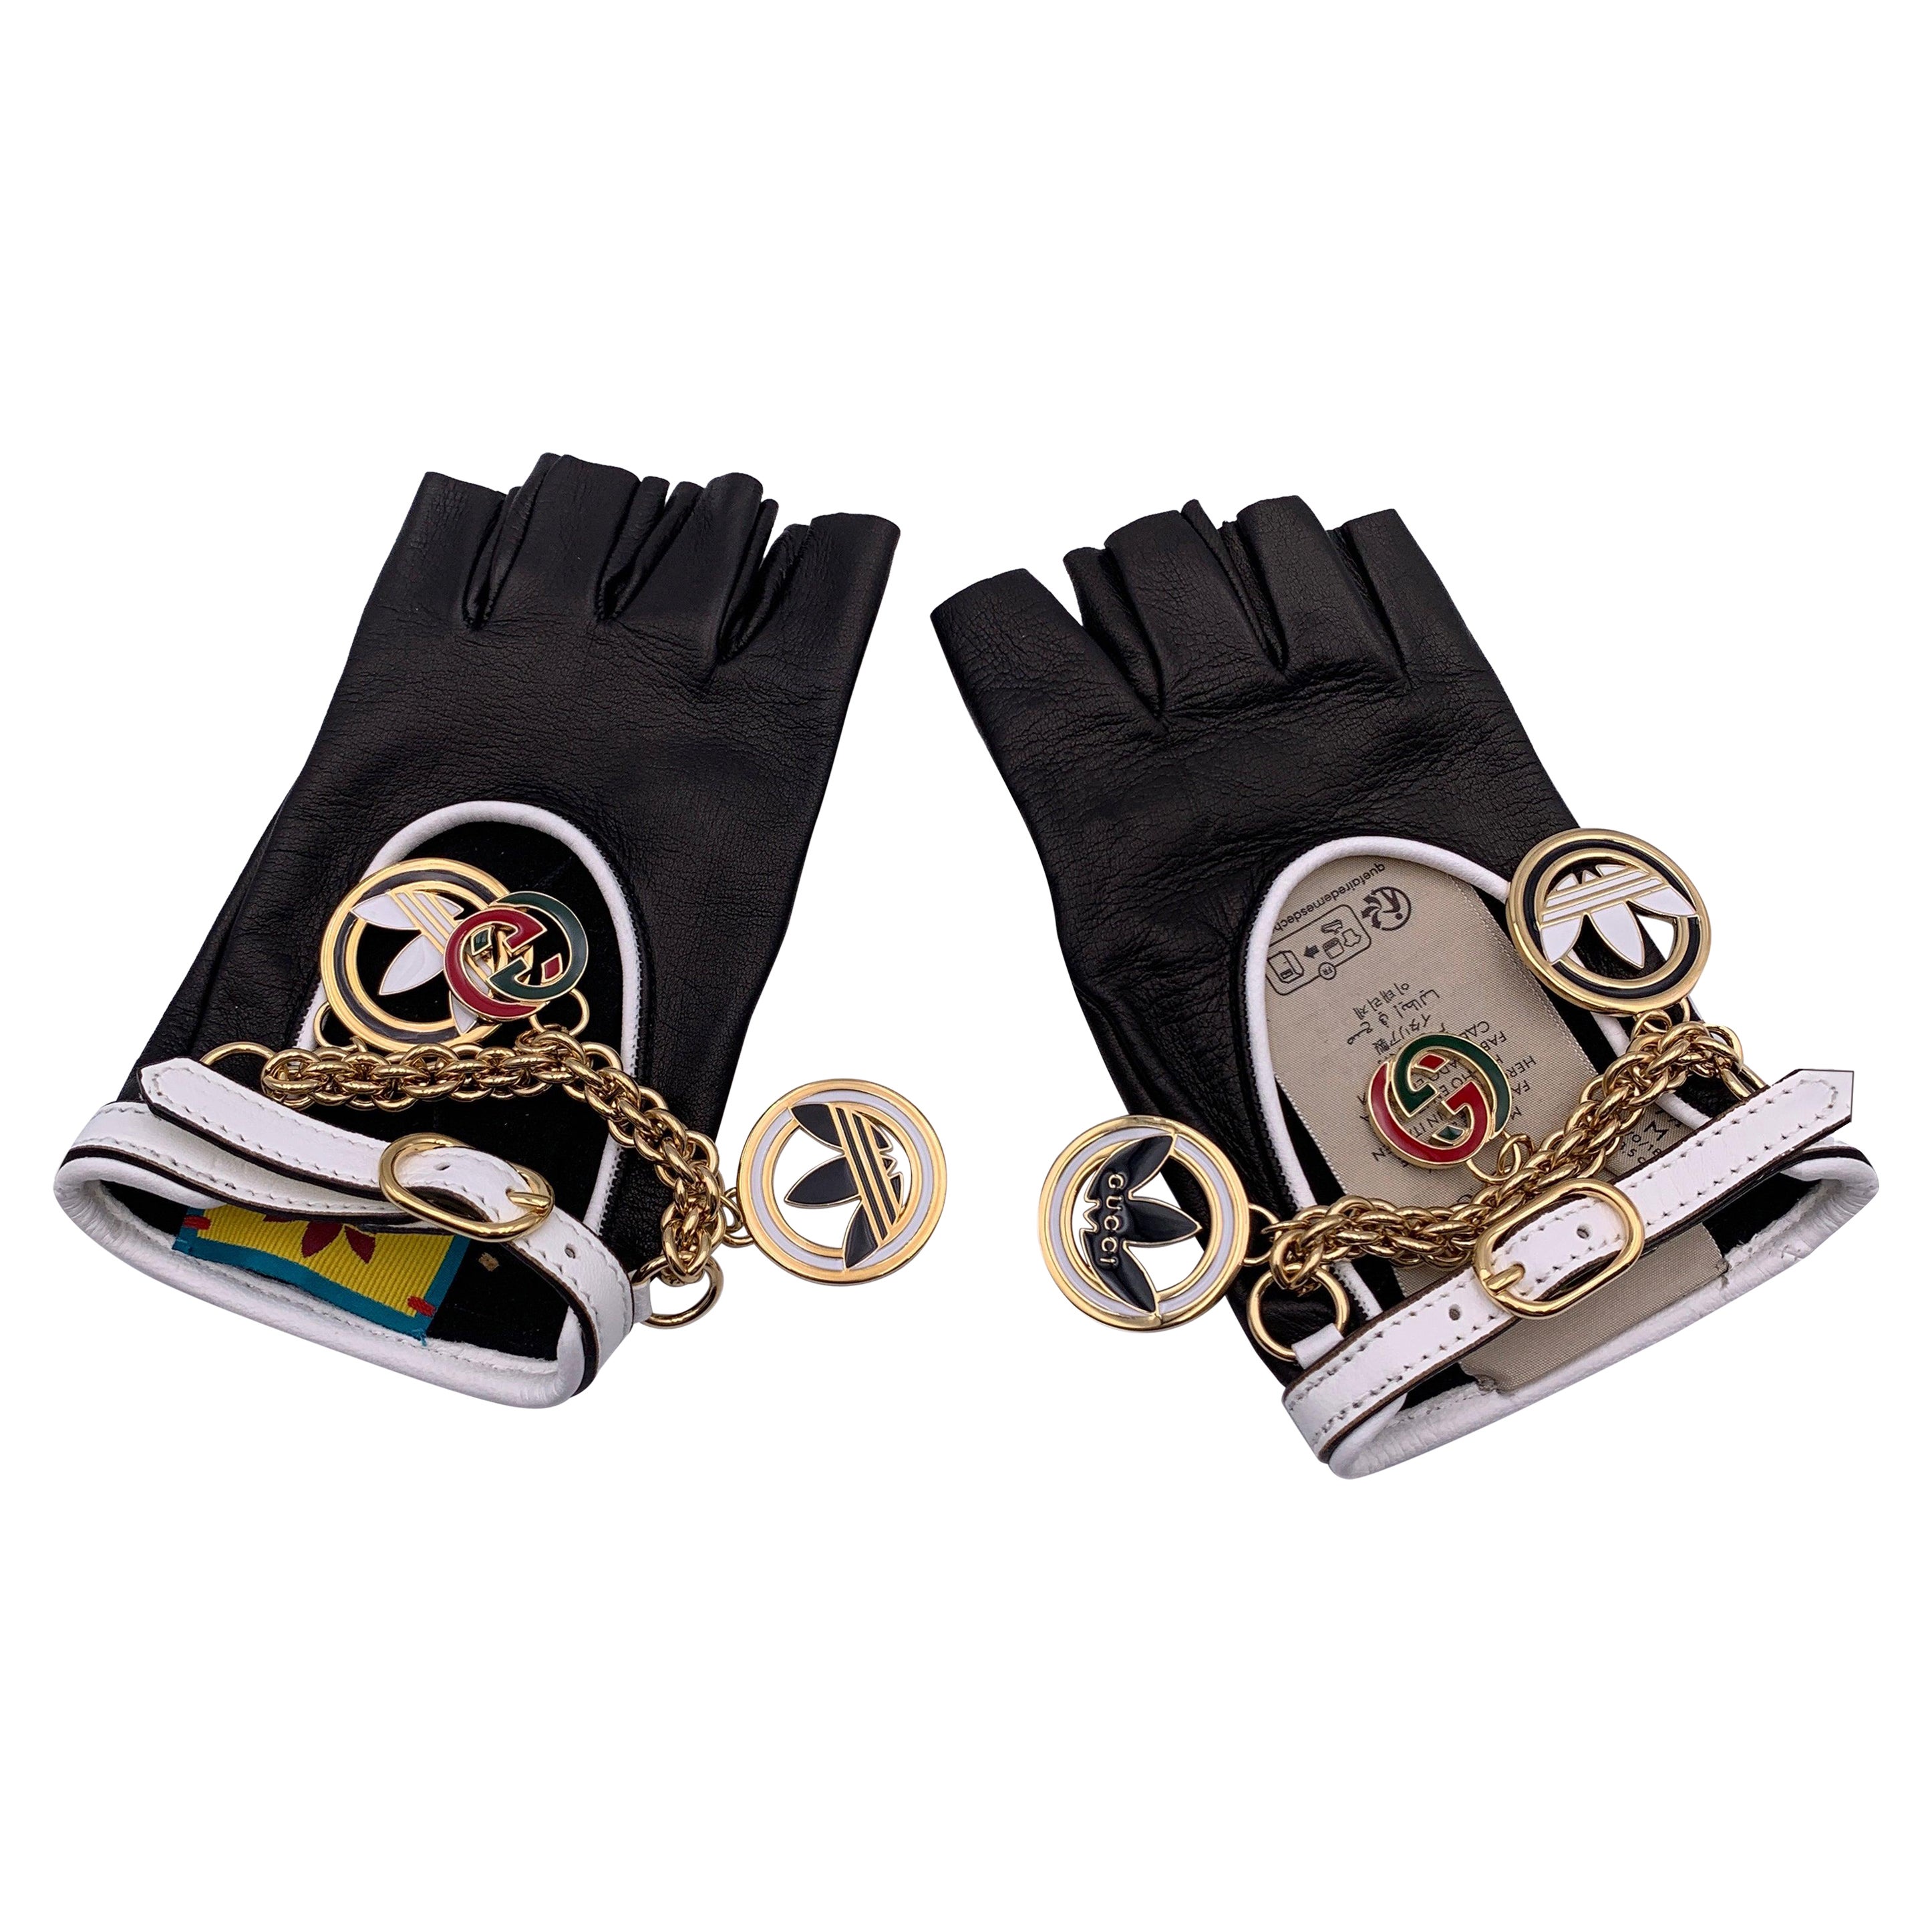 Gucci Adidas Black Leather Driver Fingerless Gloves Charms Size 7.5 For Sale